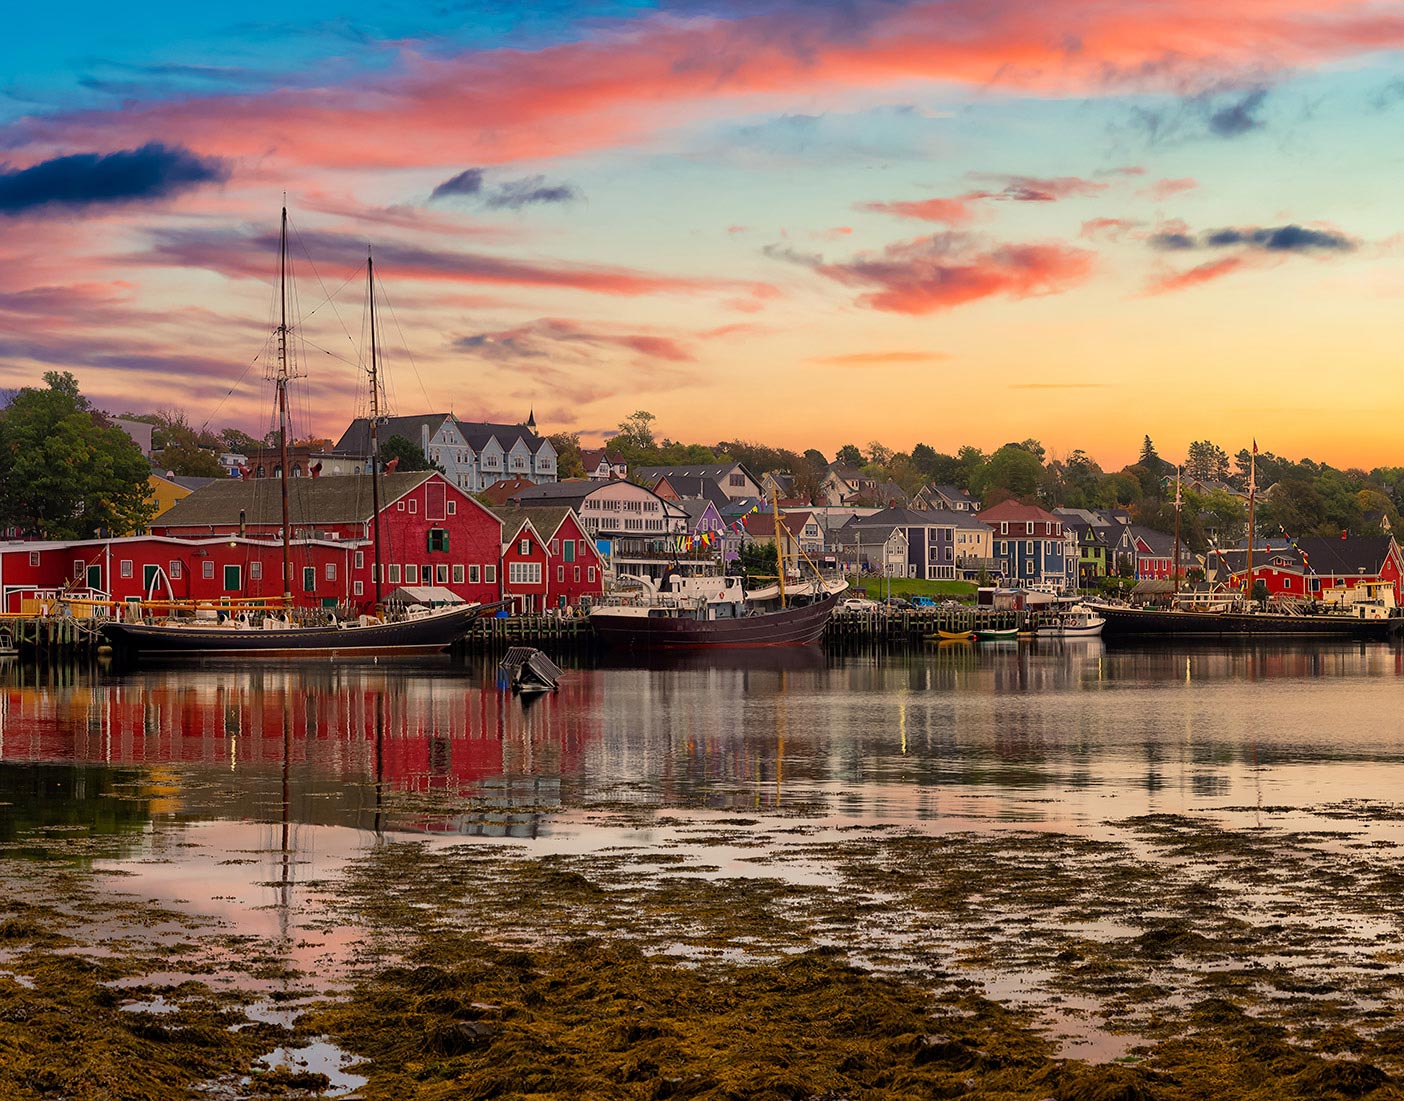 The sun sets on the waterfront in the town of Lunenburg, Nova Scotia.